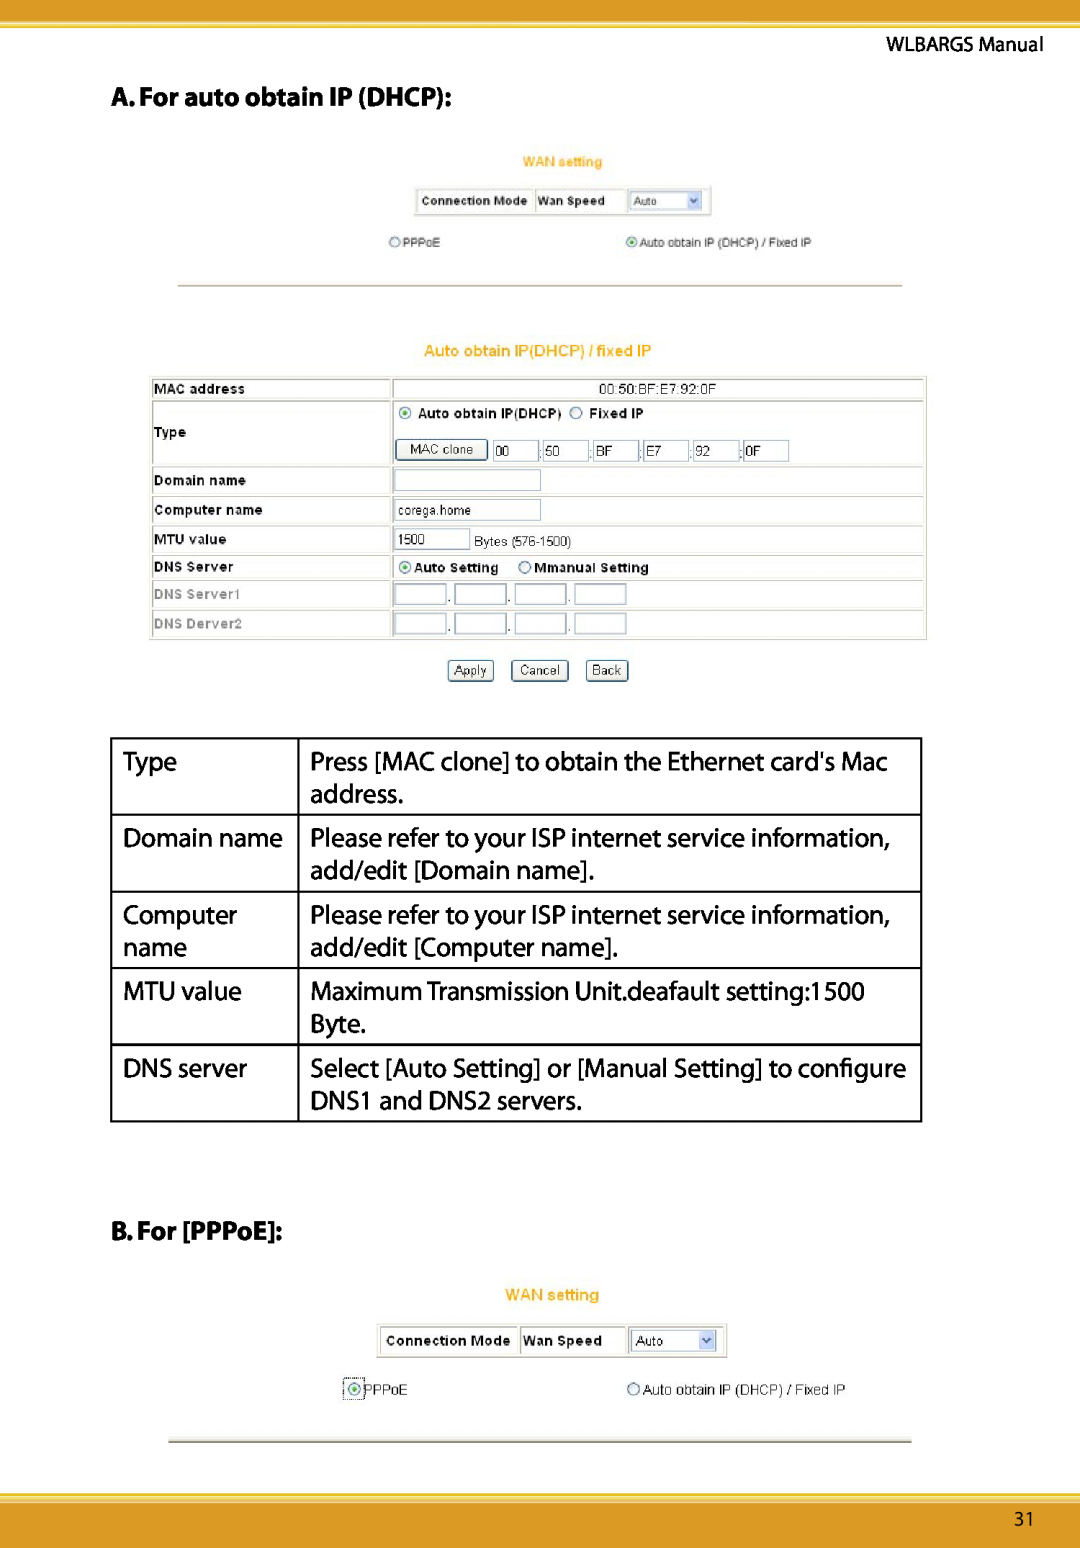 Allied Telesis CG-WLBARGS manual A. For auto obtain IP DHCP, B. For PPPoE 